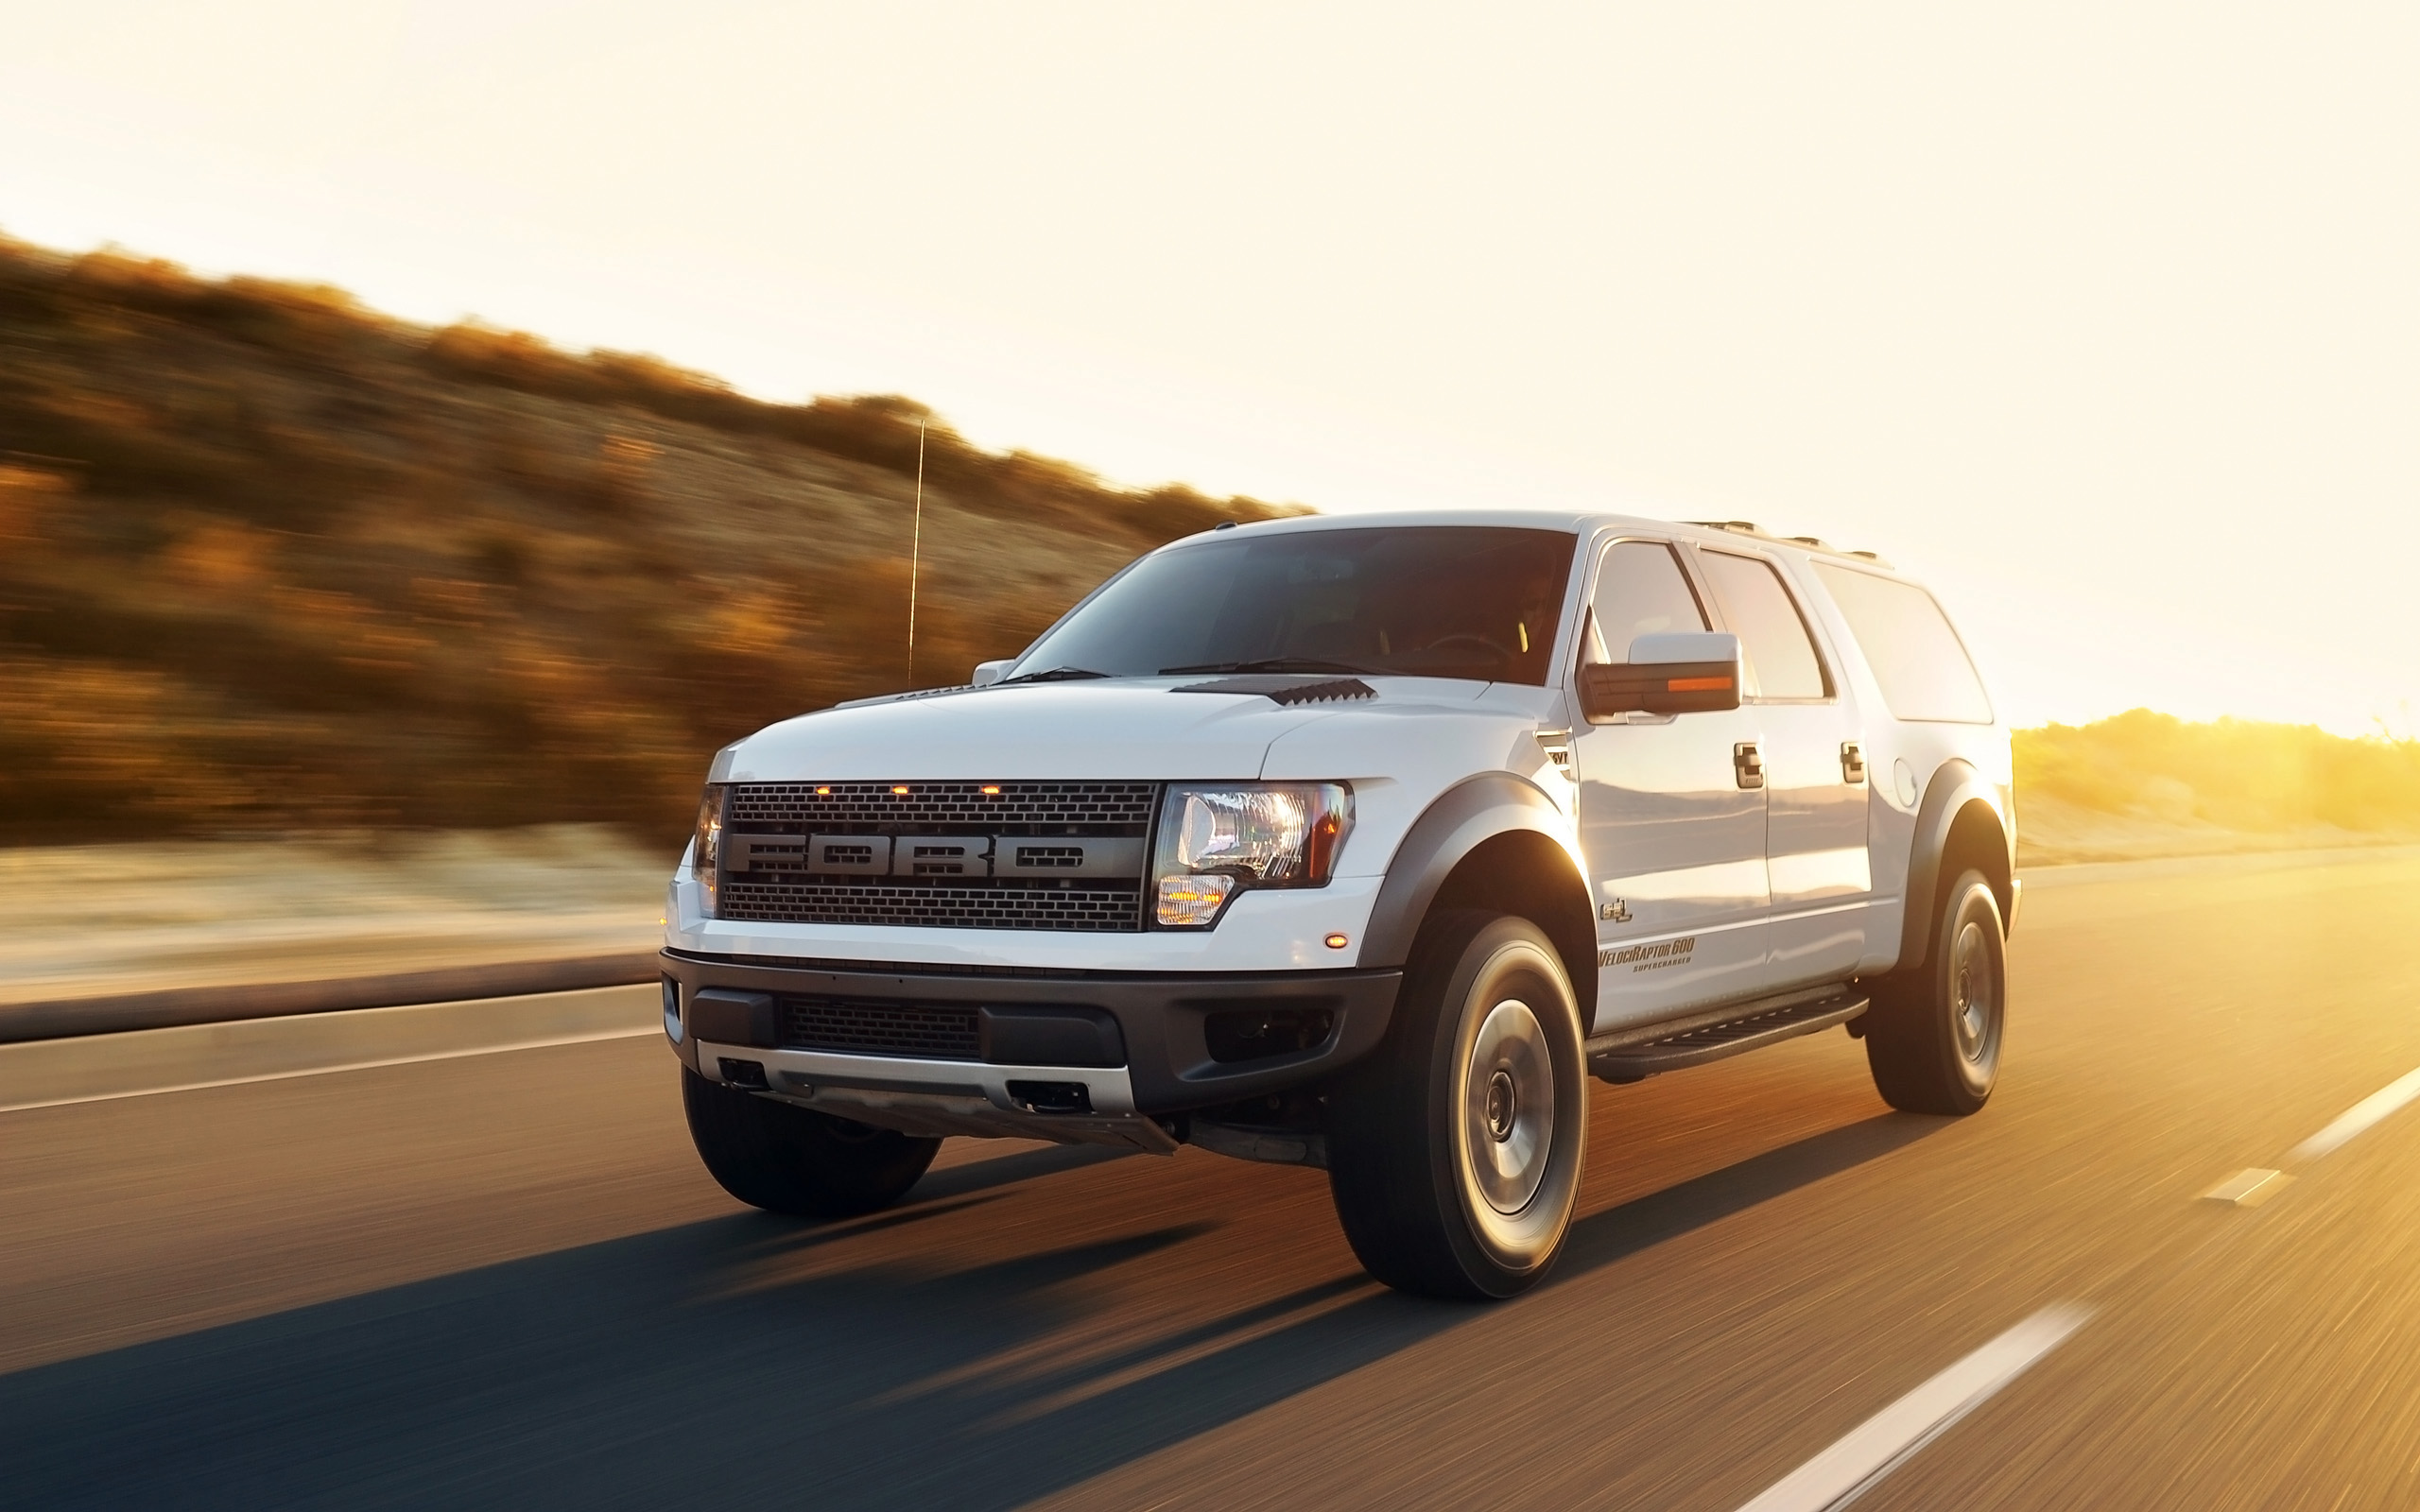 2013 Hennessey Ford Velociraptor Suv Wallpaper - Suv Ford , HD Wallpaper & Backgrounds